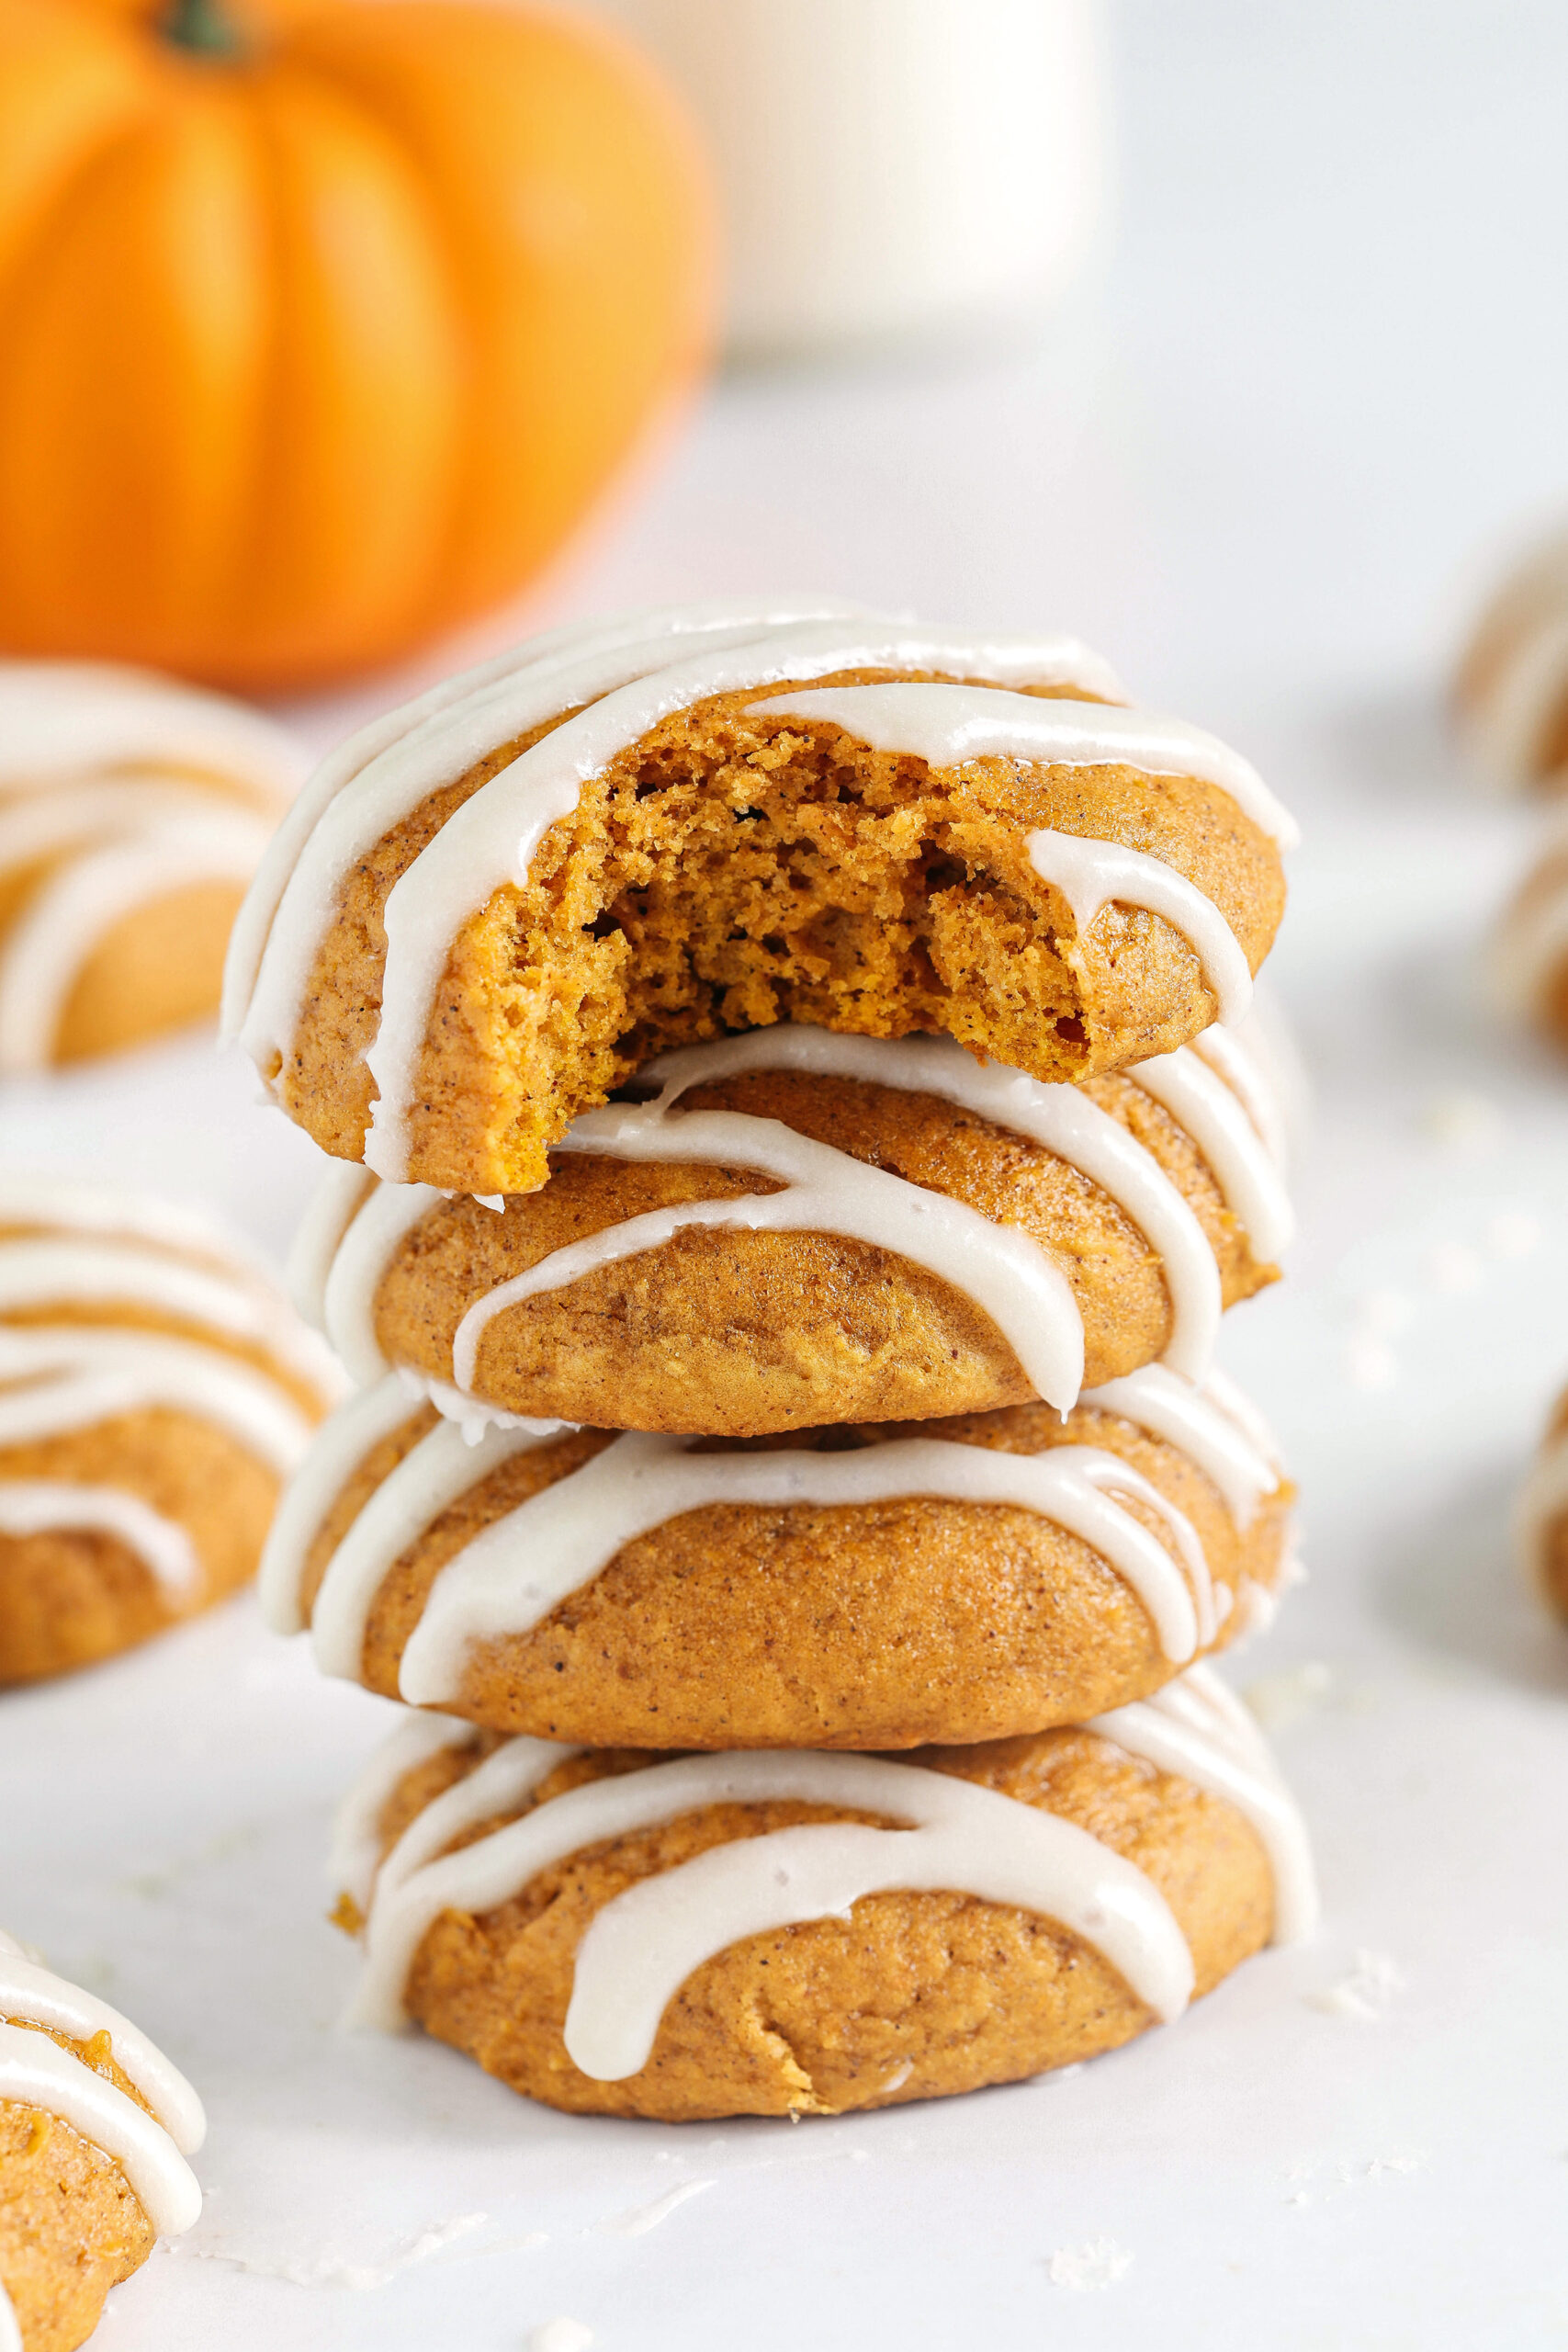 Pillowy soft Iced Pumpkin Cookies made healthier with whole wheat flour and zero butter or refined sugar all drizzled with a delicious maple cream cheese icing!  These cake-like pumpkin cookies make the perfect fall treat to enjoy this season.